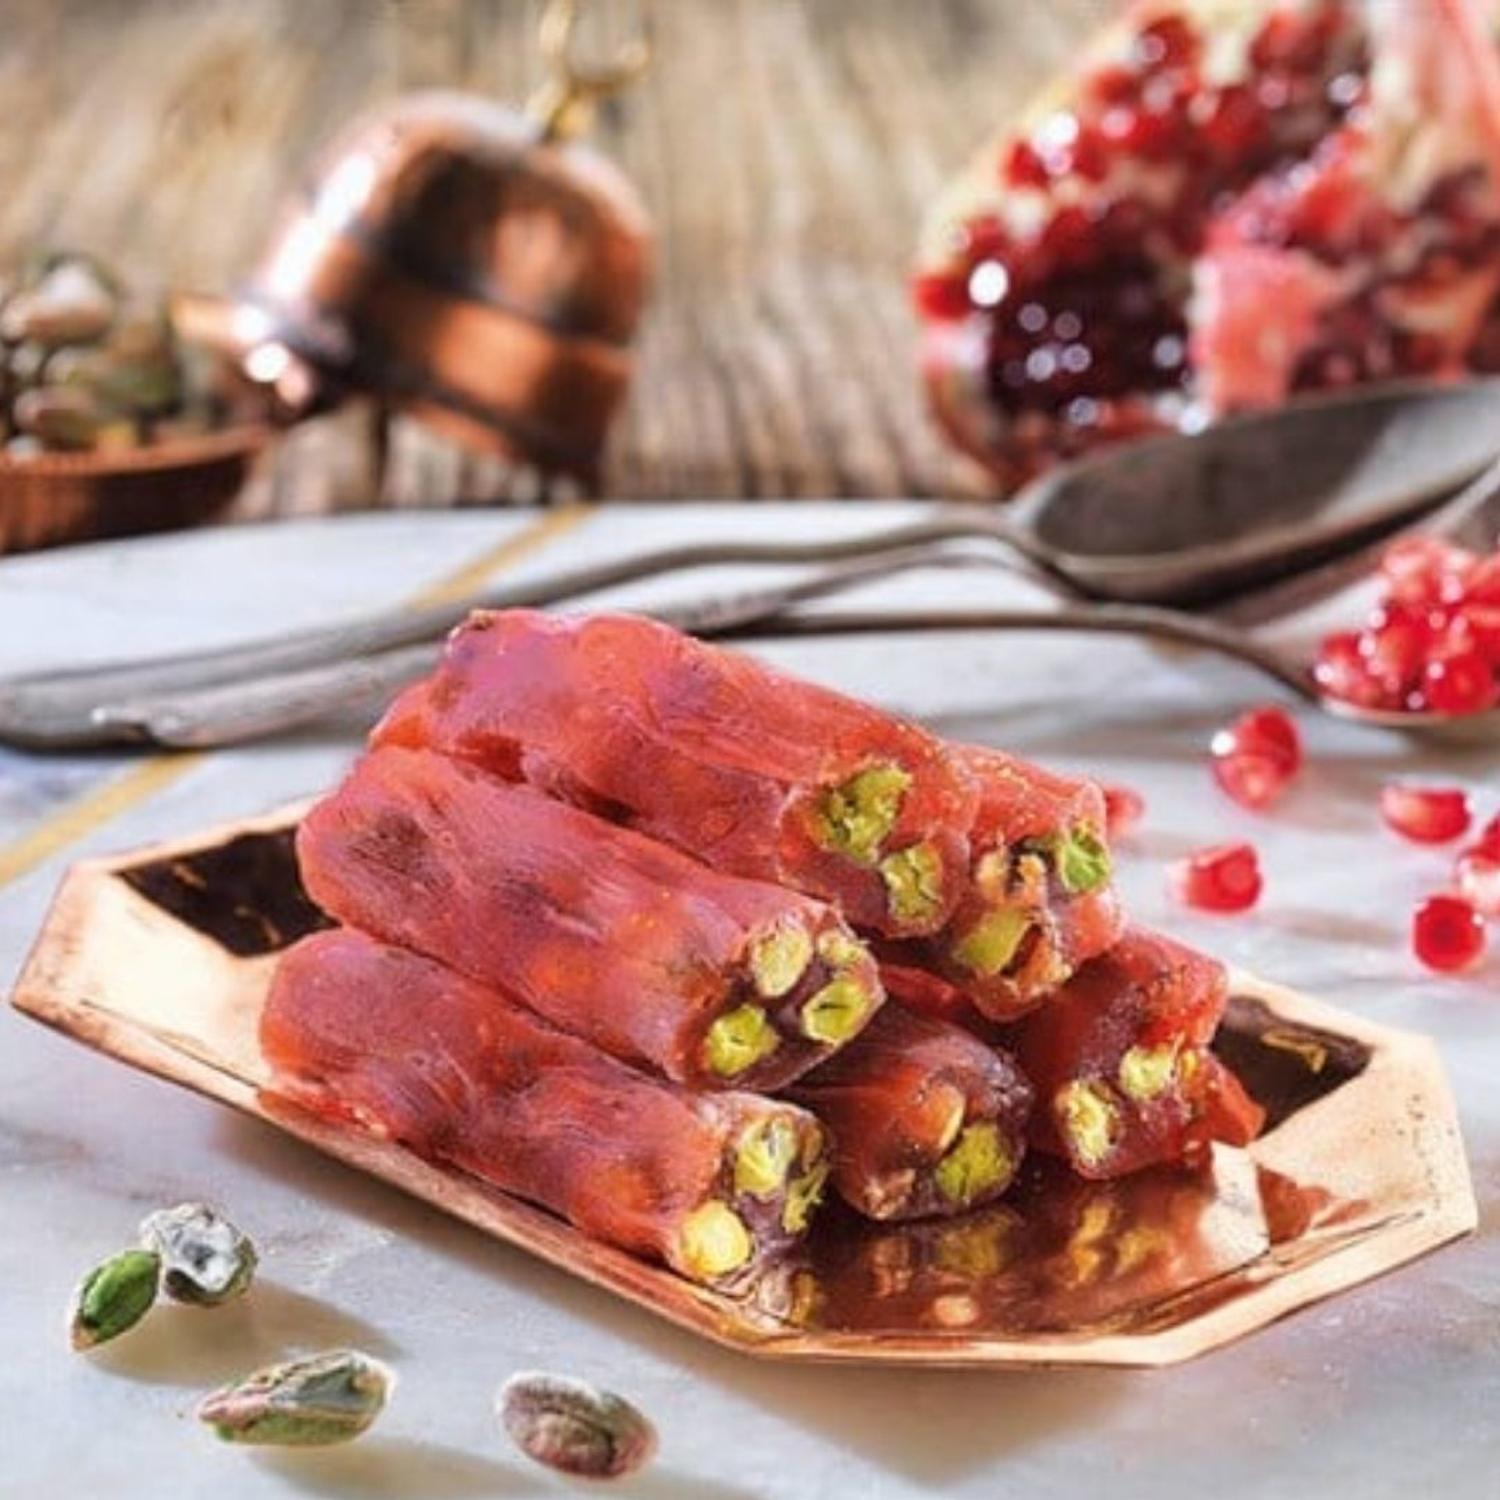 MEVLANA TURKISH DELIGHT FINGER WITH PISTACHIO AND POMEGRANATE FLAVOR resmi